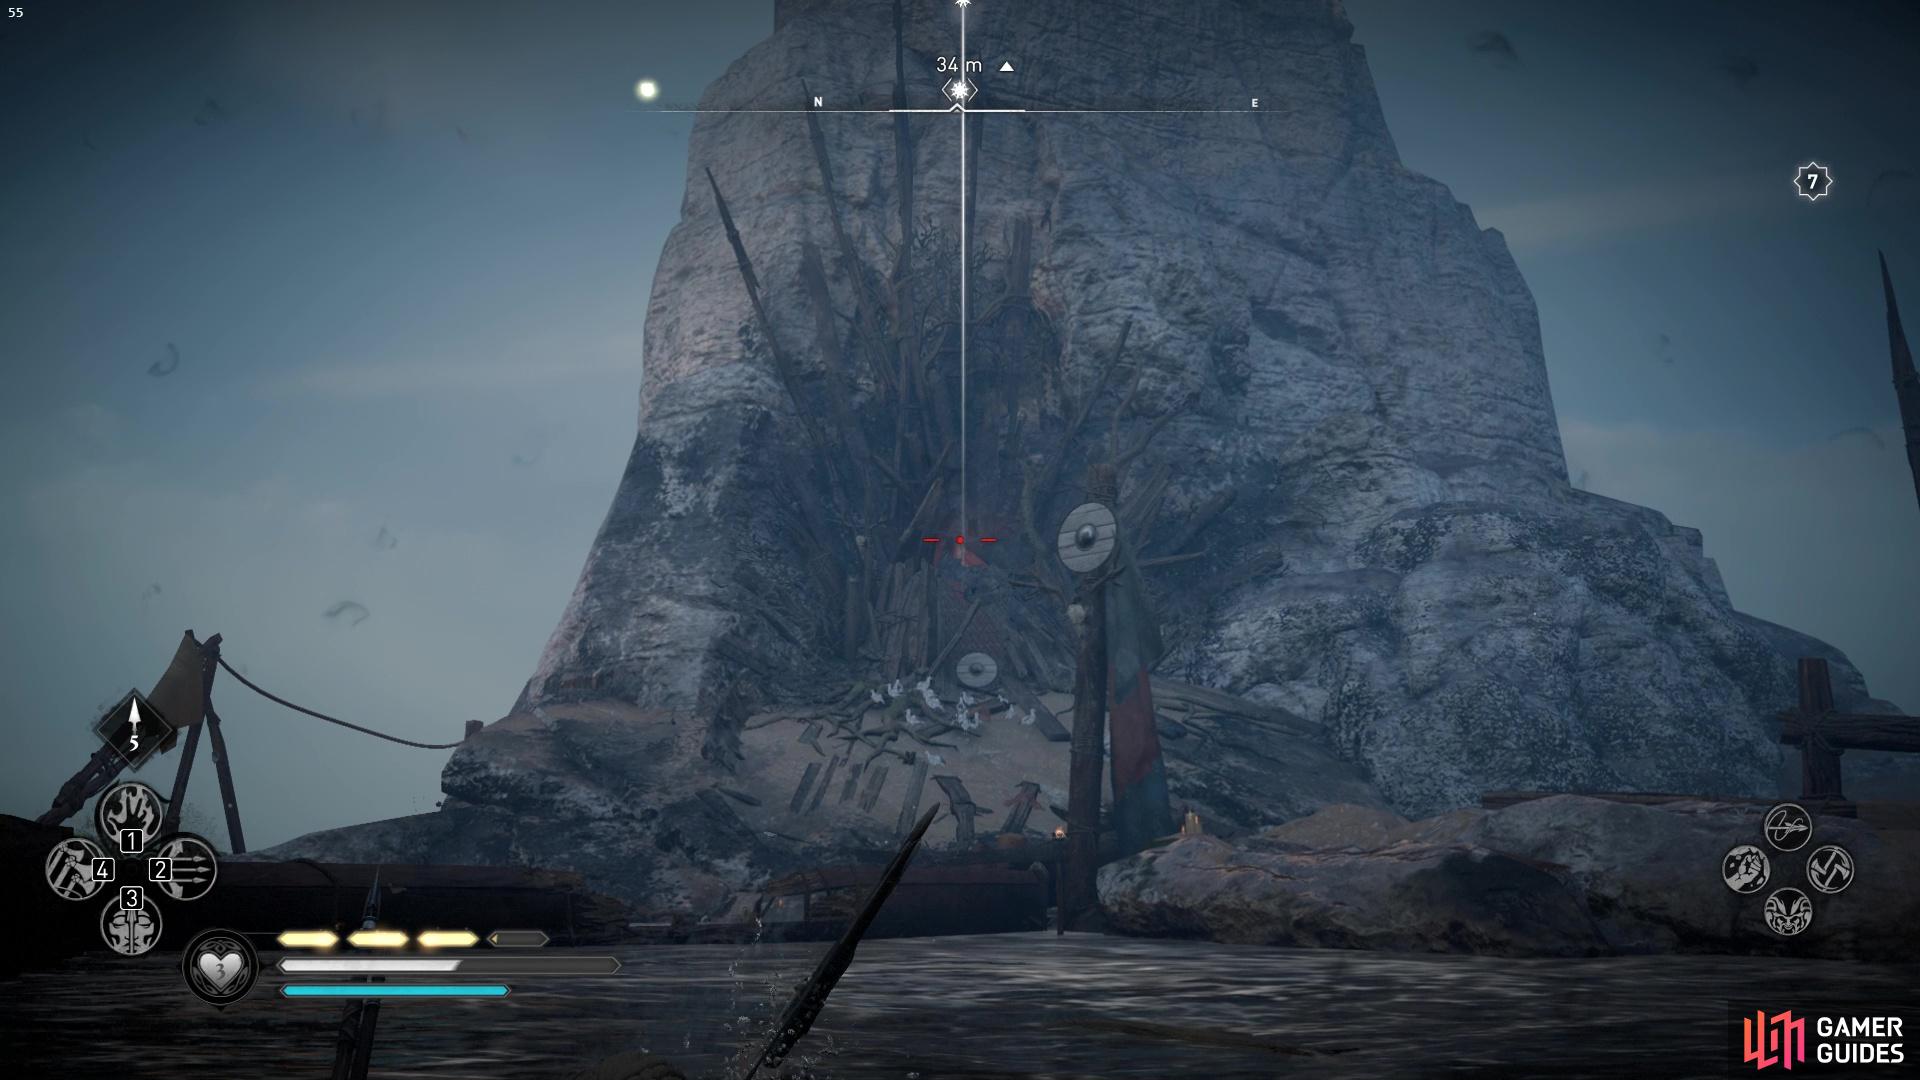 you'll need to head closer to be able to shoot the cursed symbol.